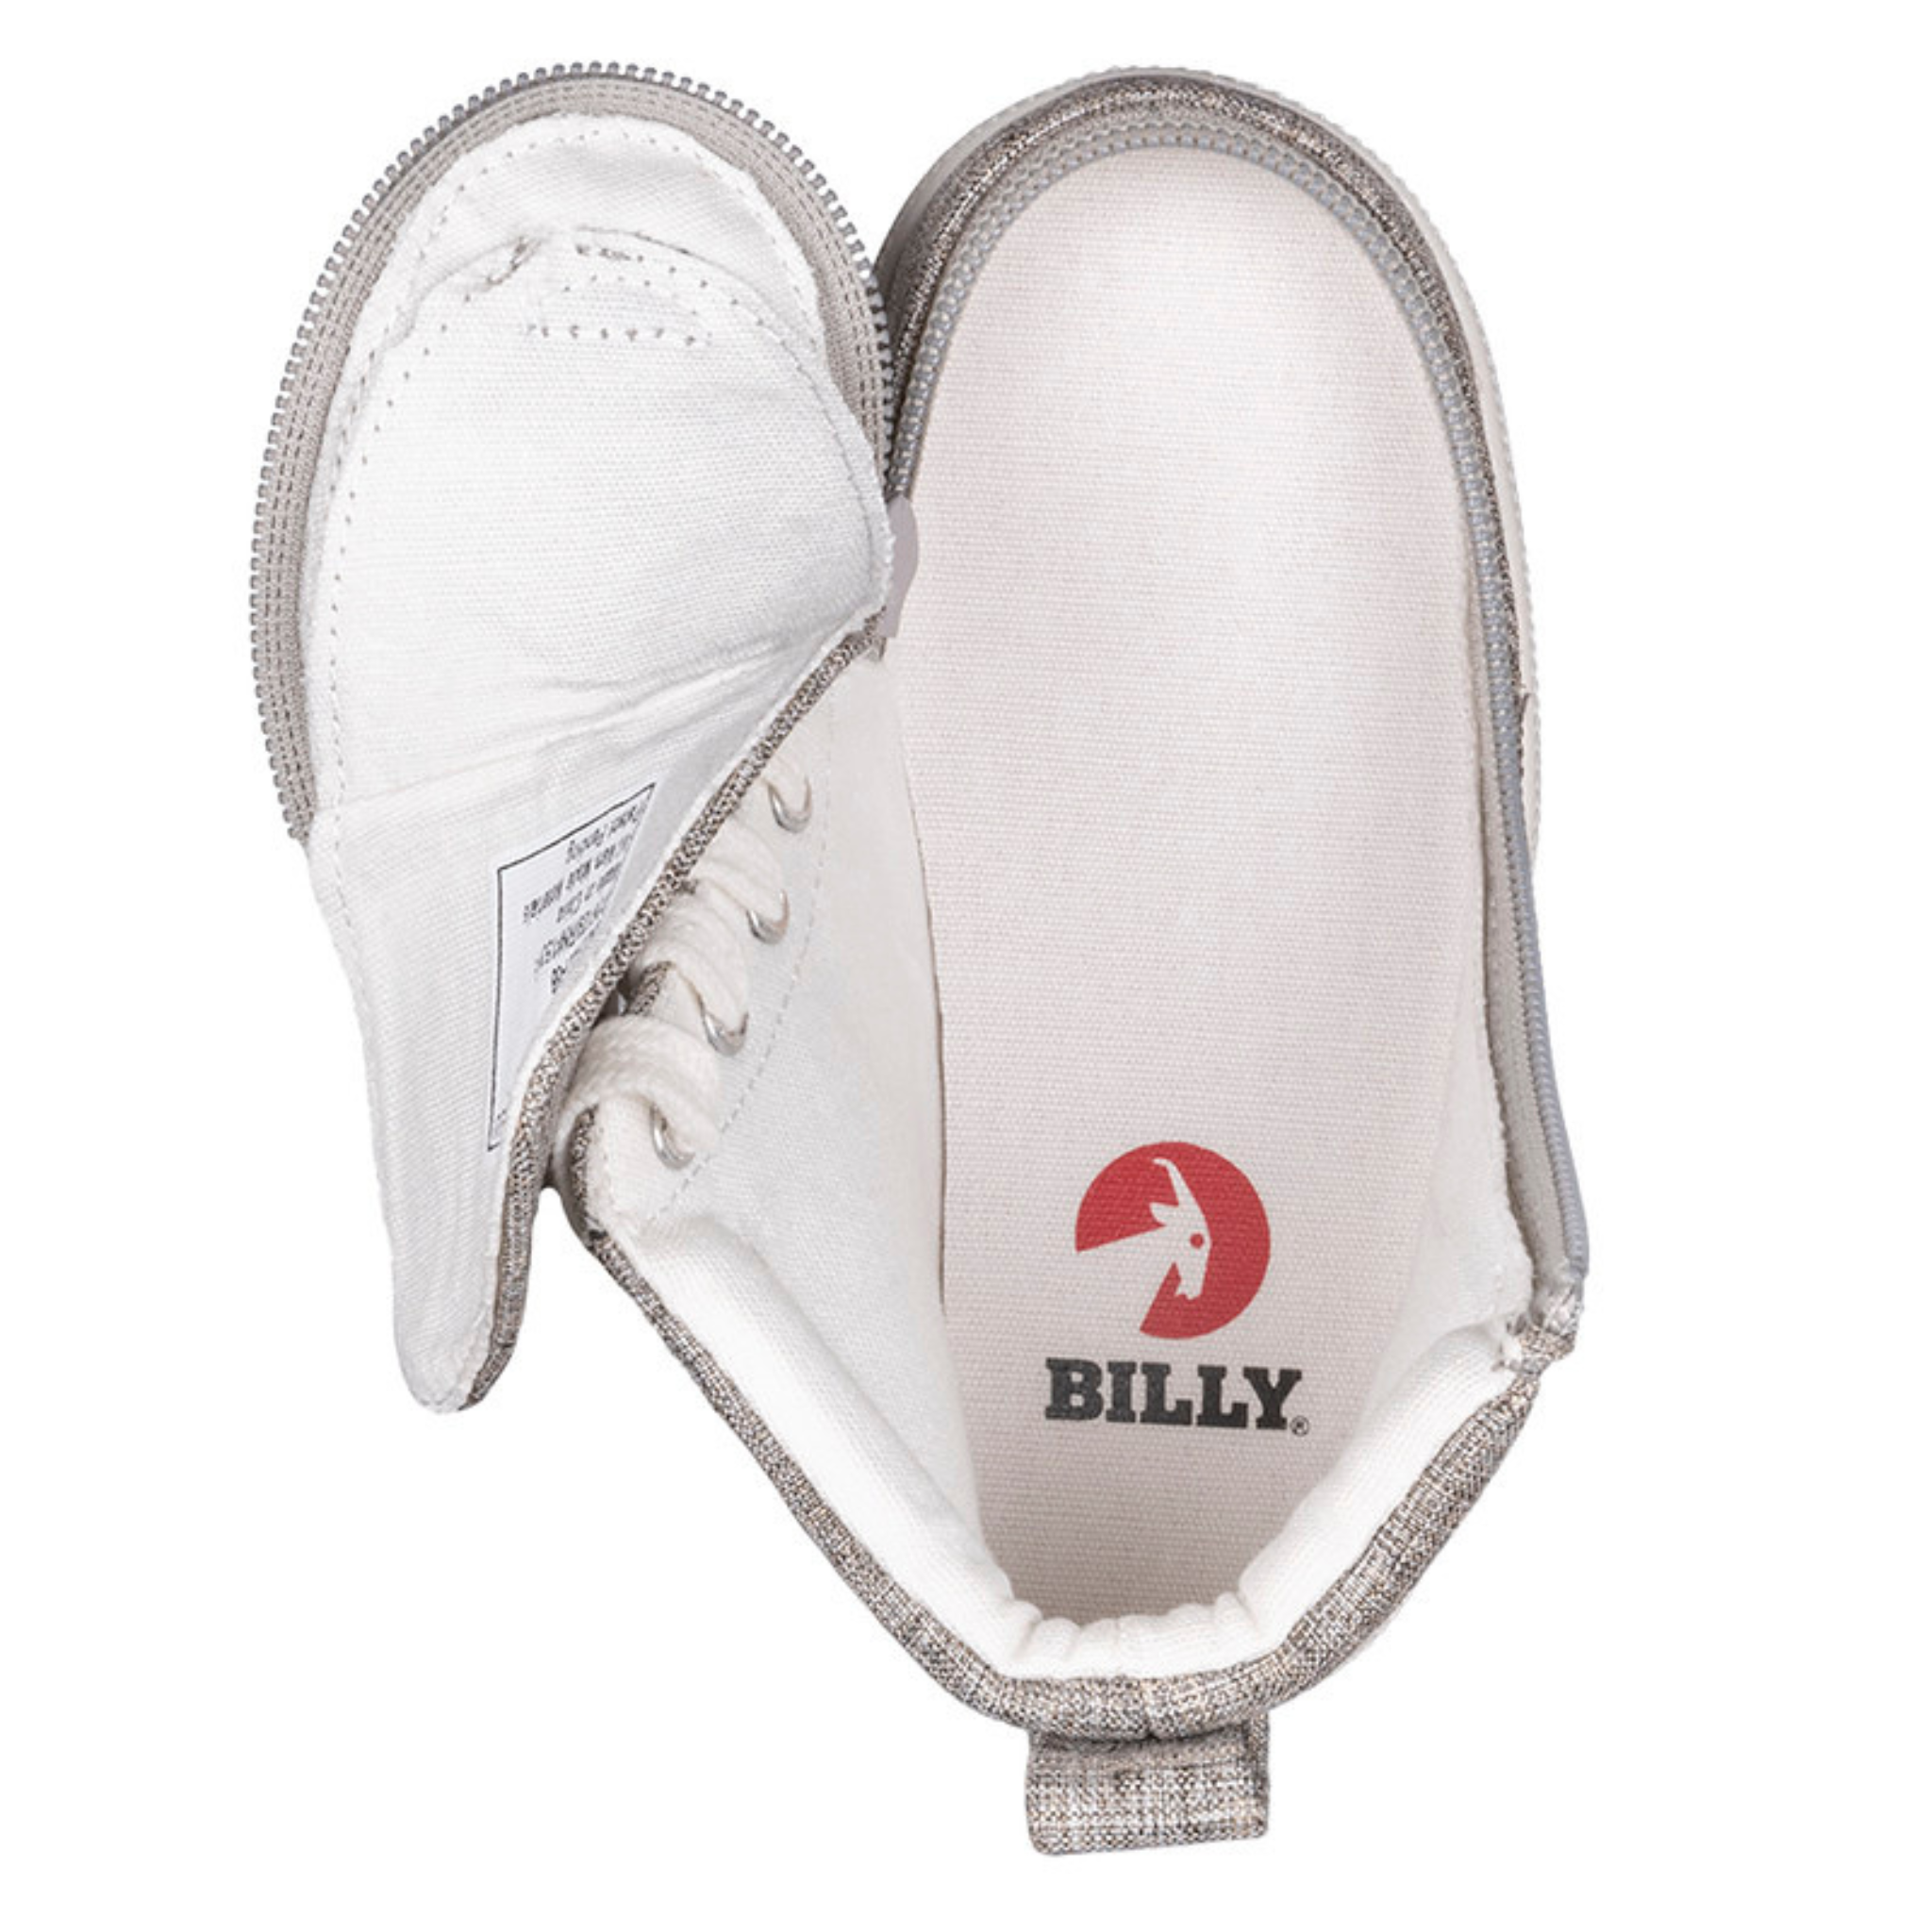 Billy Footwear (Toddlers) - High Top Linen Shoes Darker Grey Jersey CLEARANCE